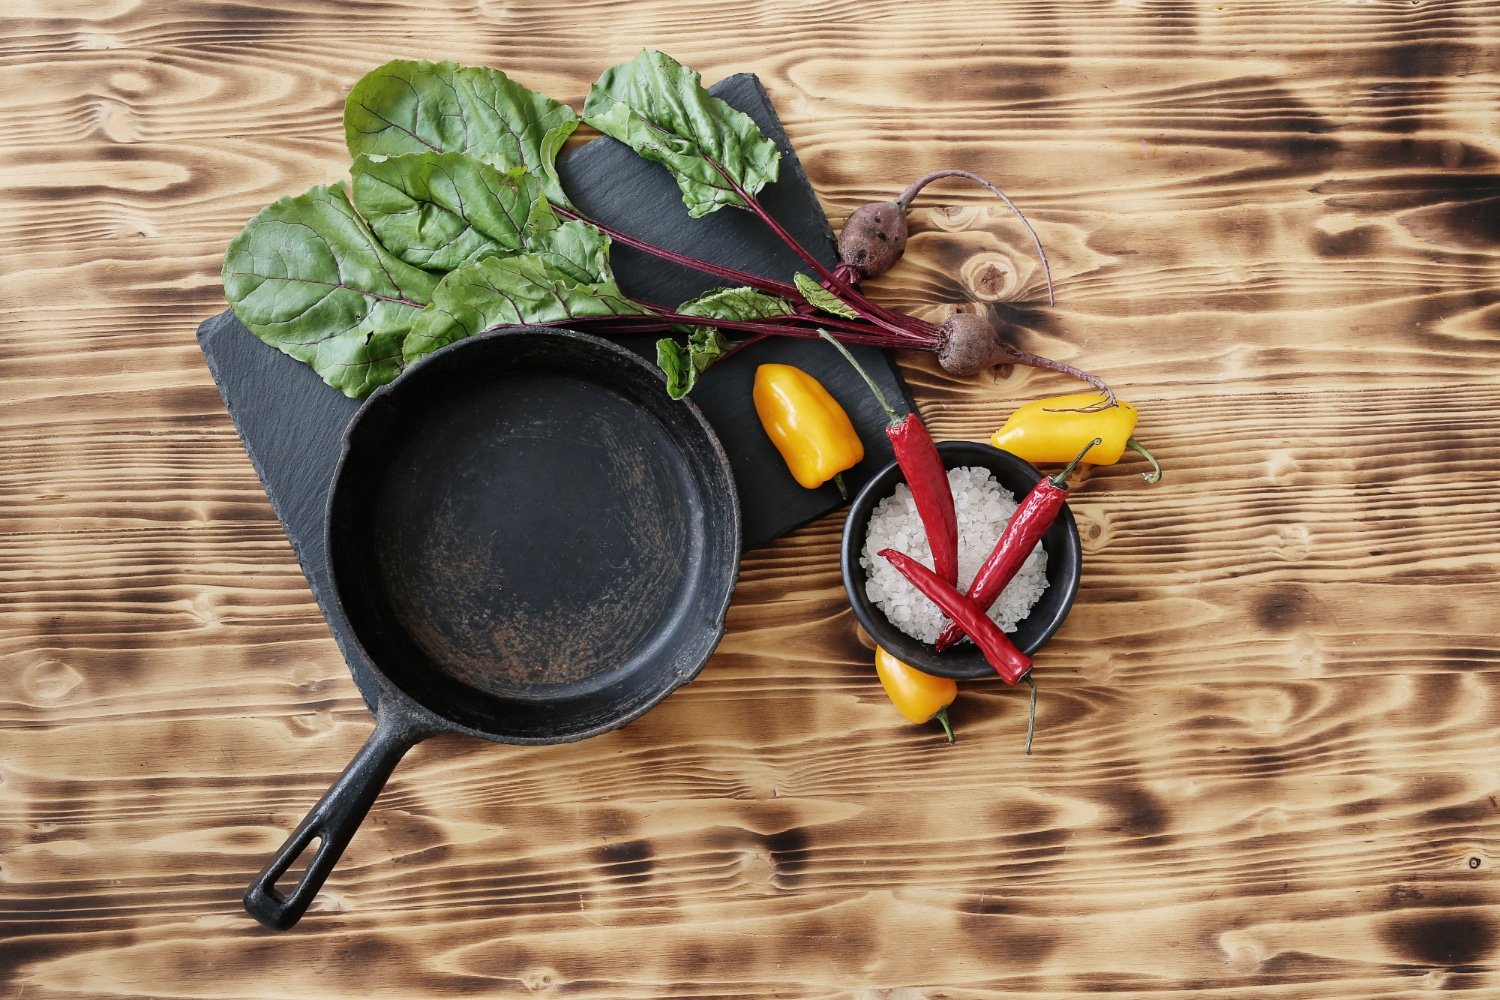 Caraway Non-Toxic Cookware for Healthy Cooking